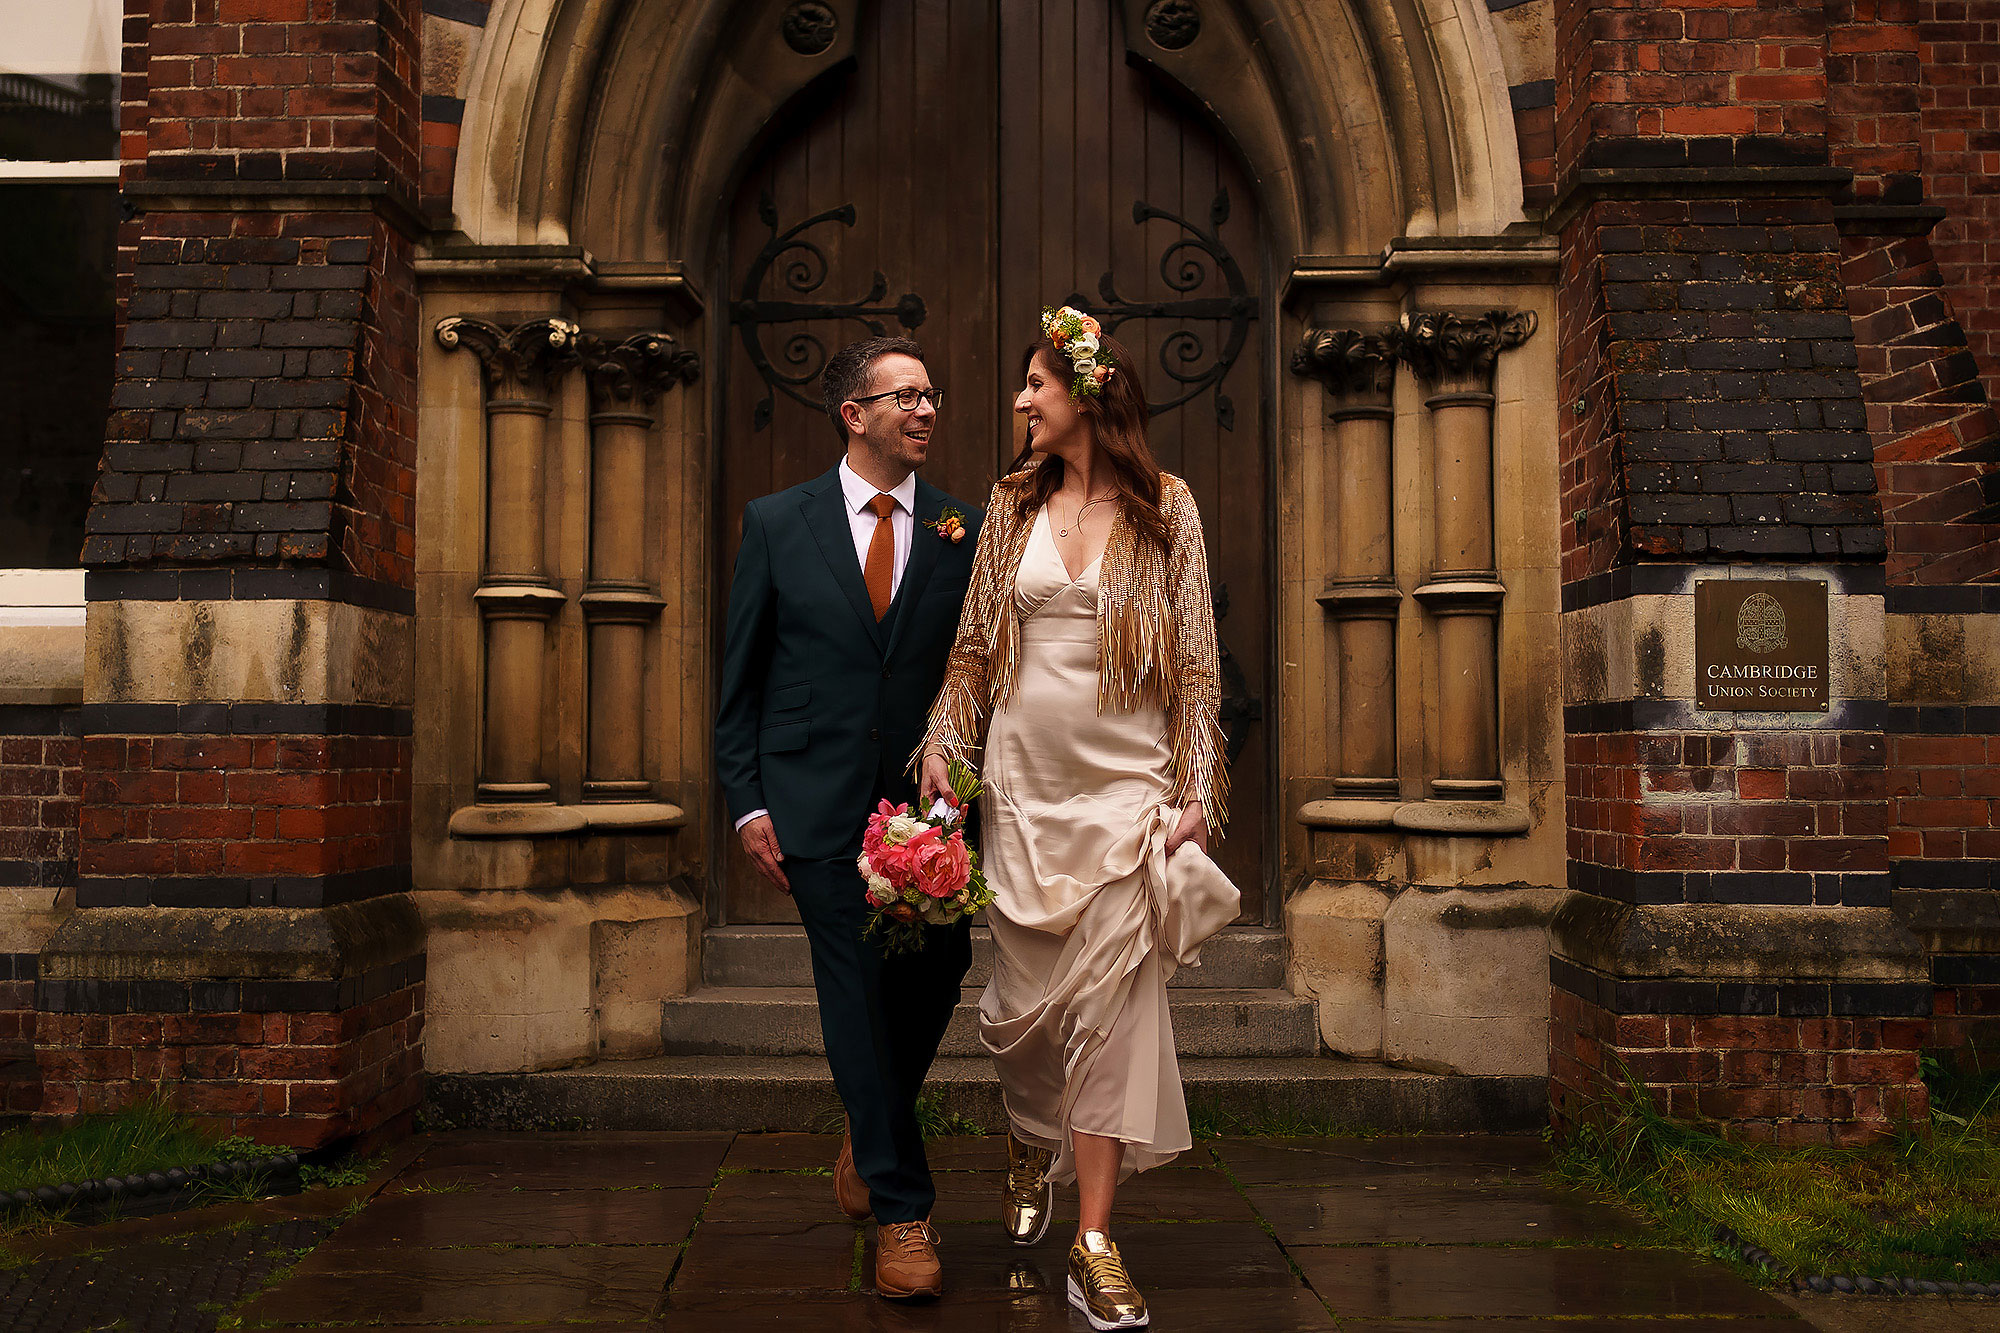 Bride wearing flower crown and cream silk dress and sequin gold jacket with gold trainers holding flowers walking next to groom in blue suit wearing tan nike trainers. Both walking outside Cambridge Union on the footpath.